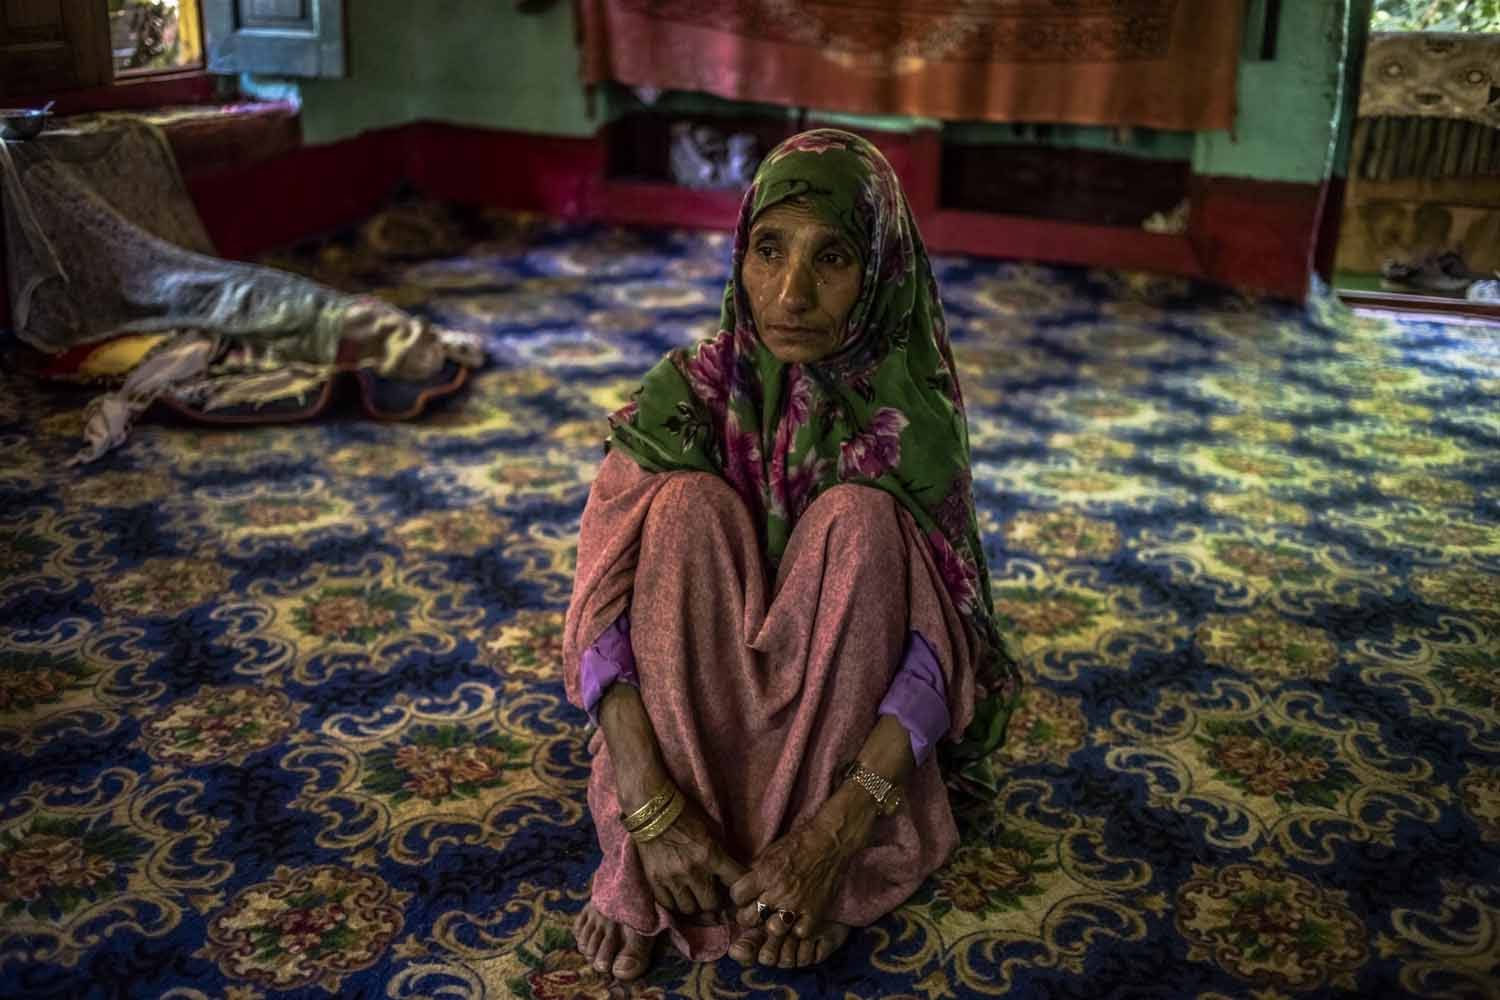 Kashmiri mother Rahma Begum, who is unsure of her age, recounts the disappearance of her son Mir Ali, who went missing in 2003, one year after he got married. For three years after he went missing, Rahma, who lives in Kashmir's Kupwara district, searched for her son, leaving home daily to visit surrounding villages and consult with 'pirs', or faith healers in the district of Sopore and Srinagar who told her they could 'contact' her son. One pir told her her son was near the border with Pakistan; another that Ali had 'appeared' to him and told him he had been abducted by a group of men. Yet another repeatedly asked her to come back the following day, and he would tell her where her son had gone. Villagers told her the search was in vain. 'They told me I had gone mad, that I was mad', she says. She finally stopped looking for Ali after seeing her son in a dream. (AFP / Rebecca Conway)